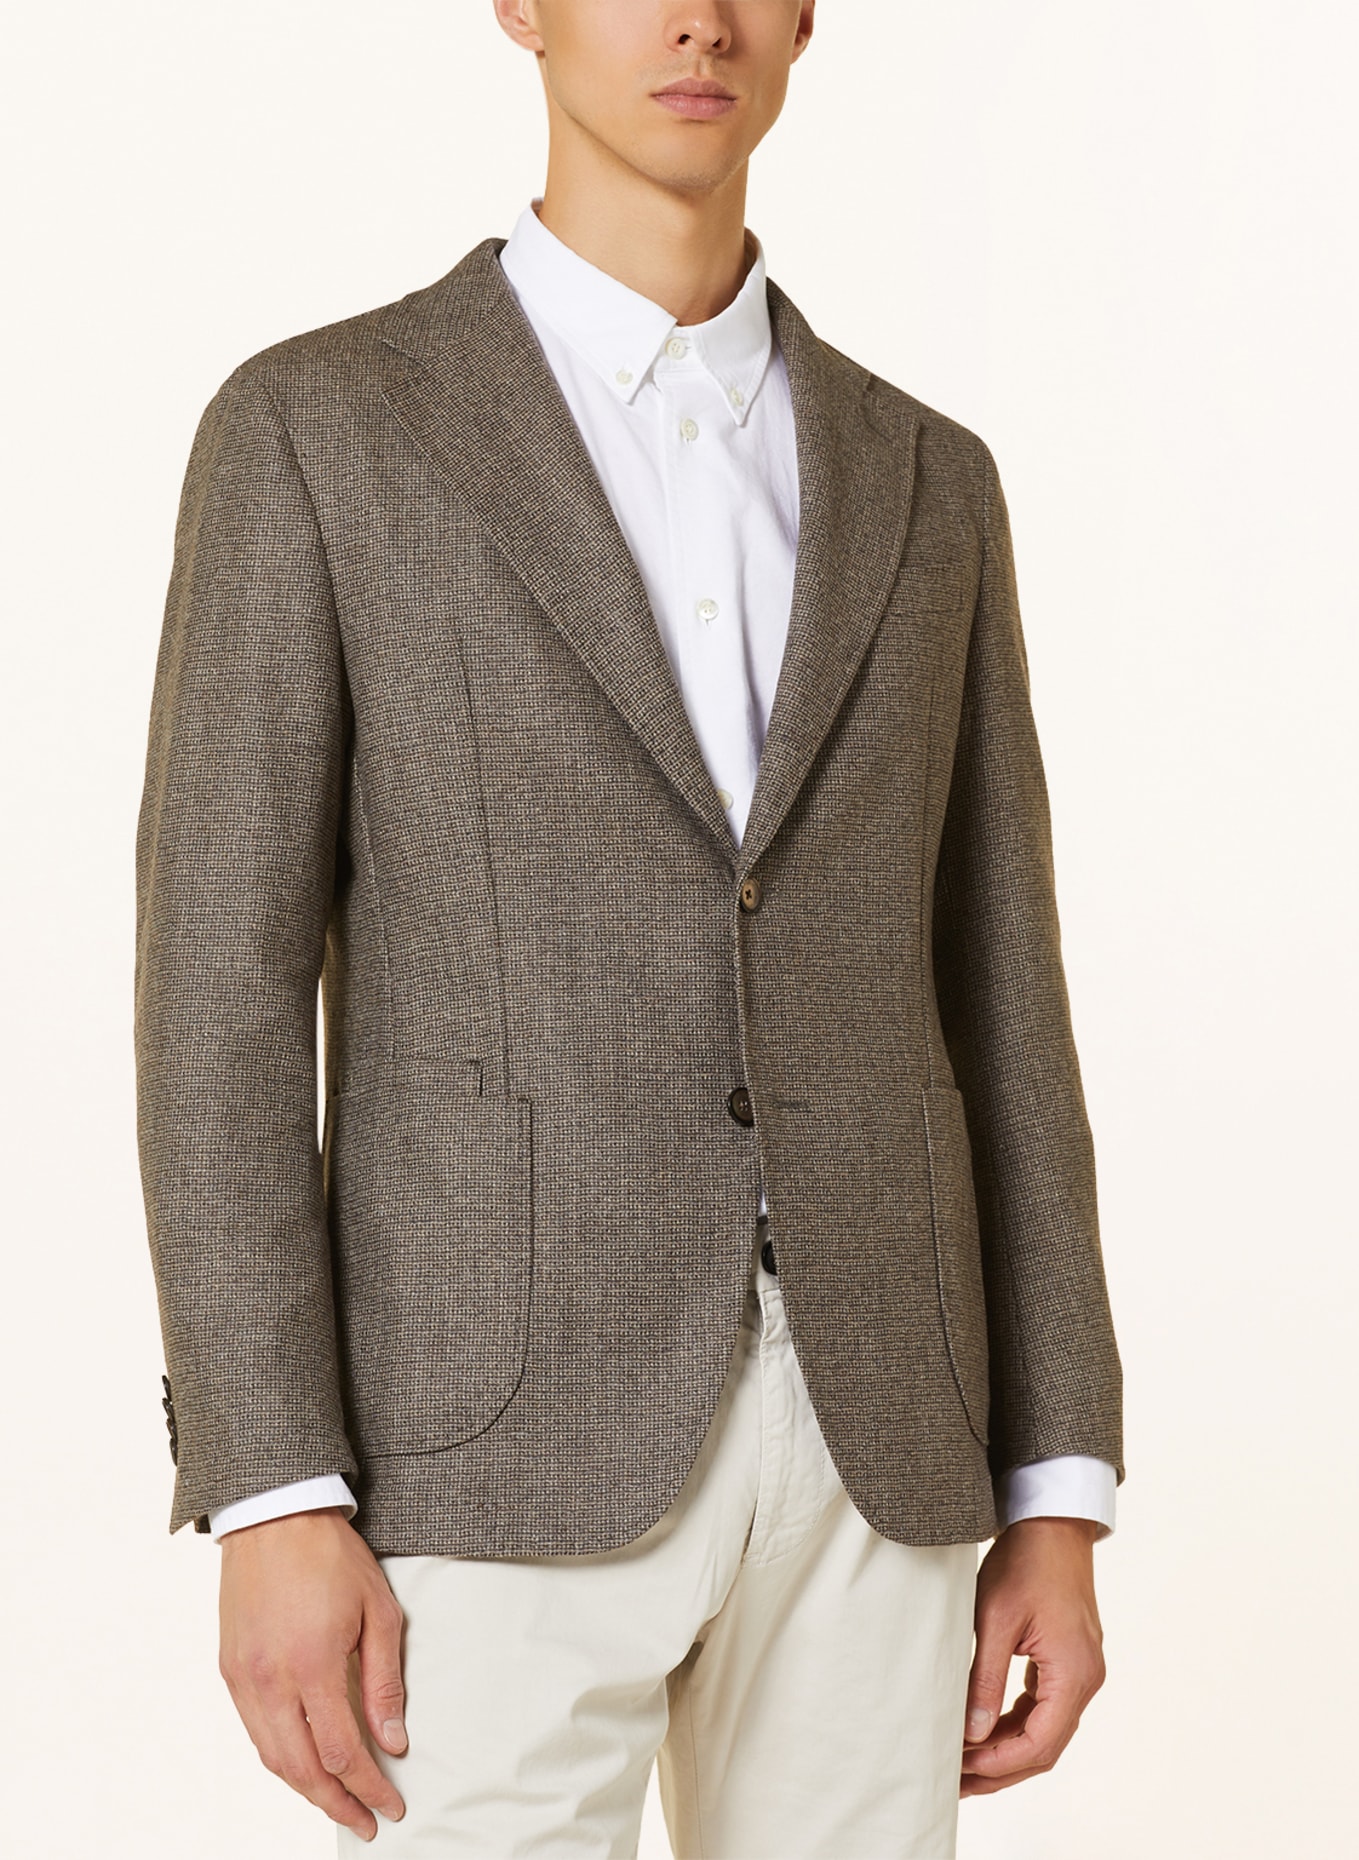 windsor. Tailored jacket TRIEST extra slim fit with detachable trim, Color: DARK BROWN/ BEIGE (Image 6)